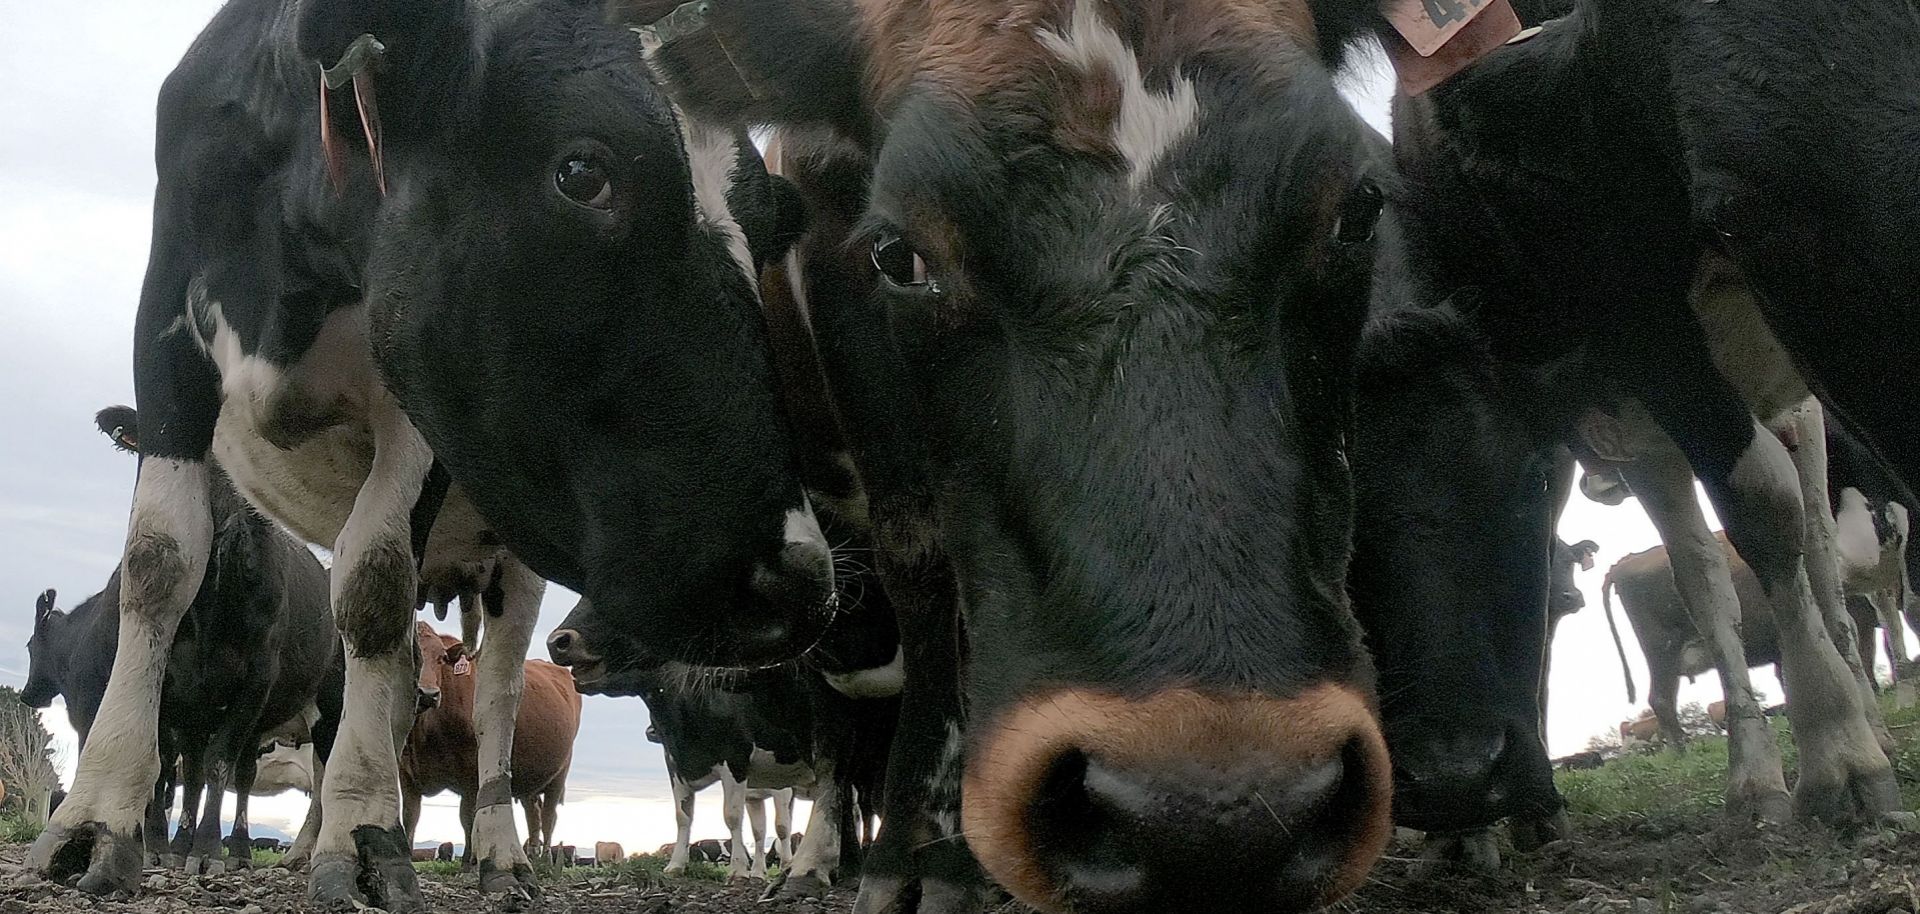 This photo shows cattle on a farm in Ashburton, New Zealand